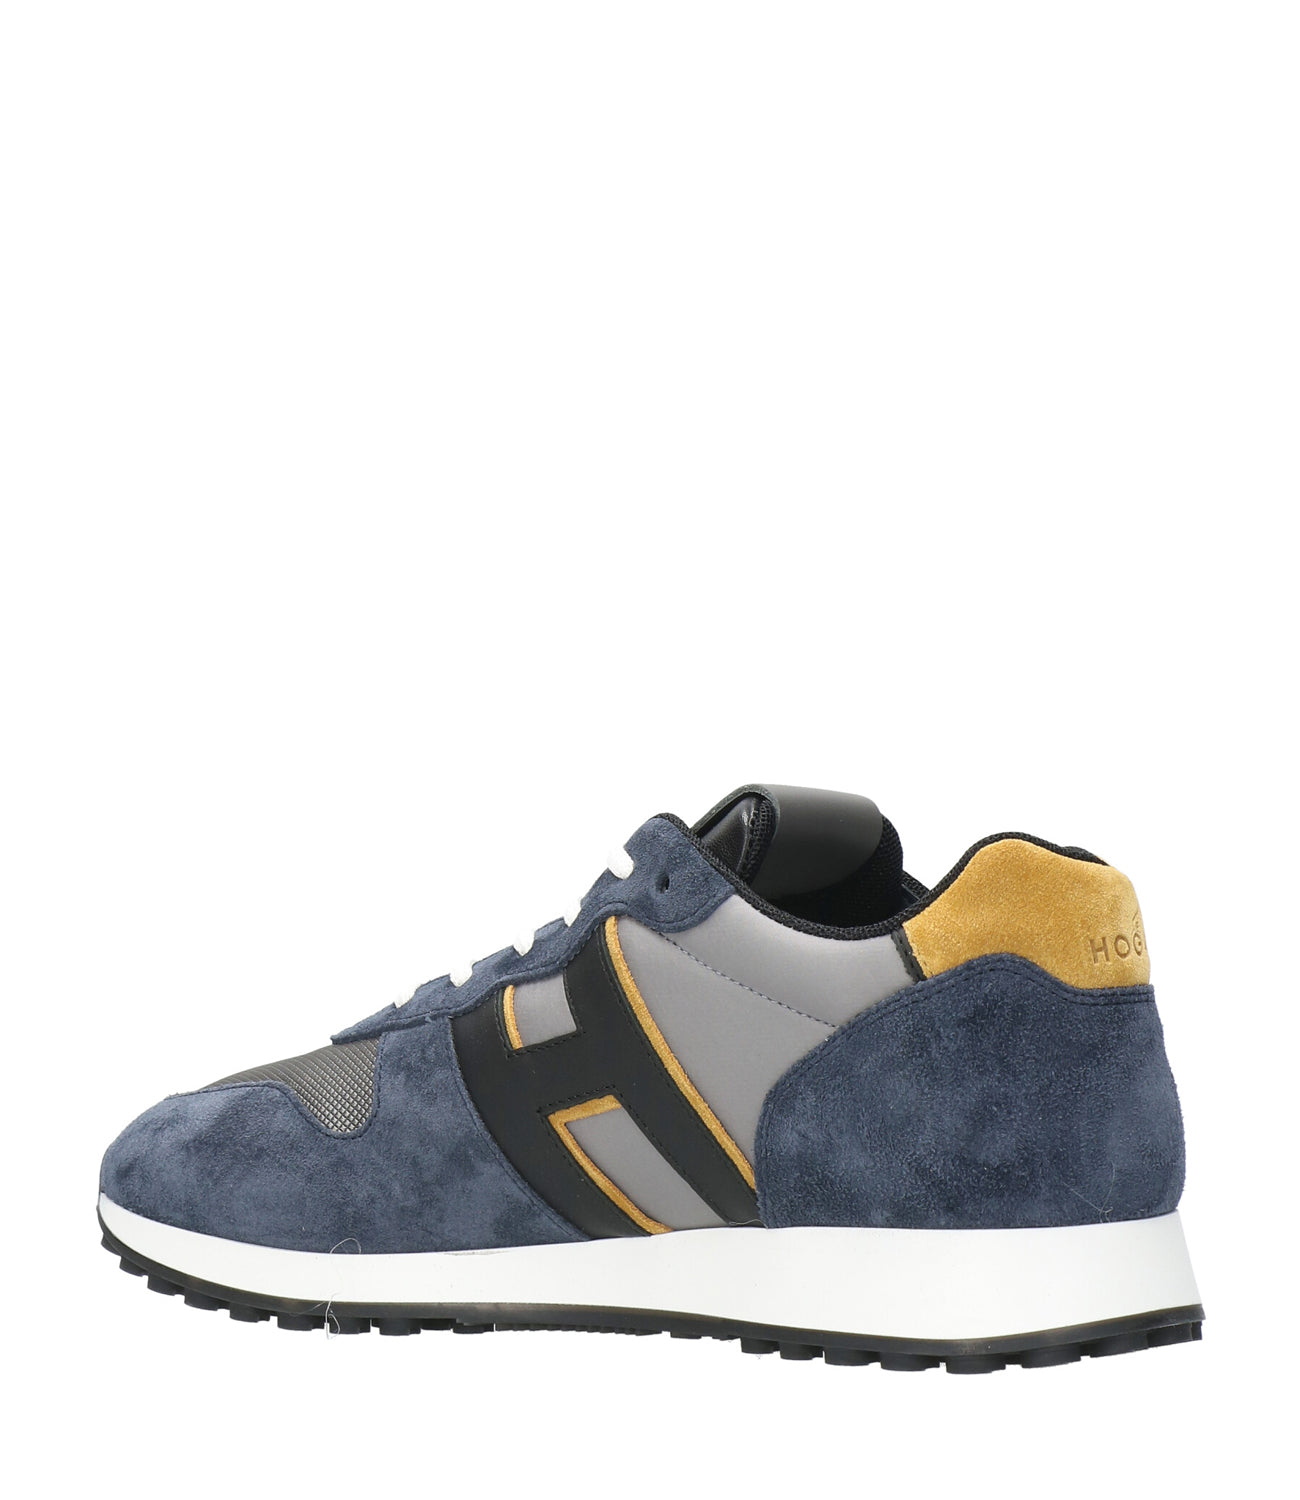 Hogan | Sneakers H383 Blue, Yellow and Grey